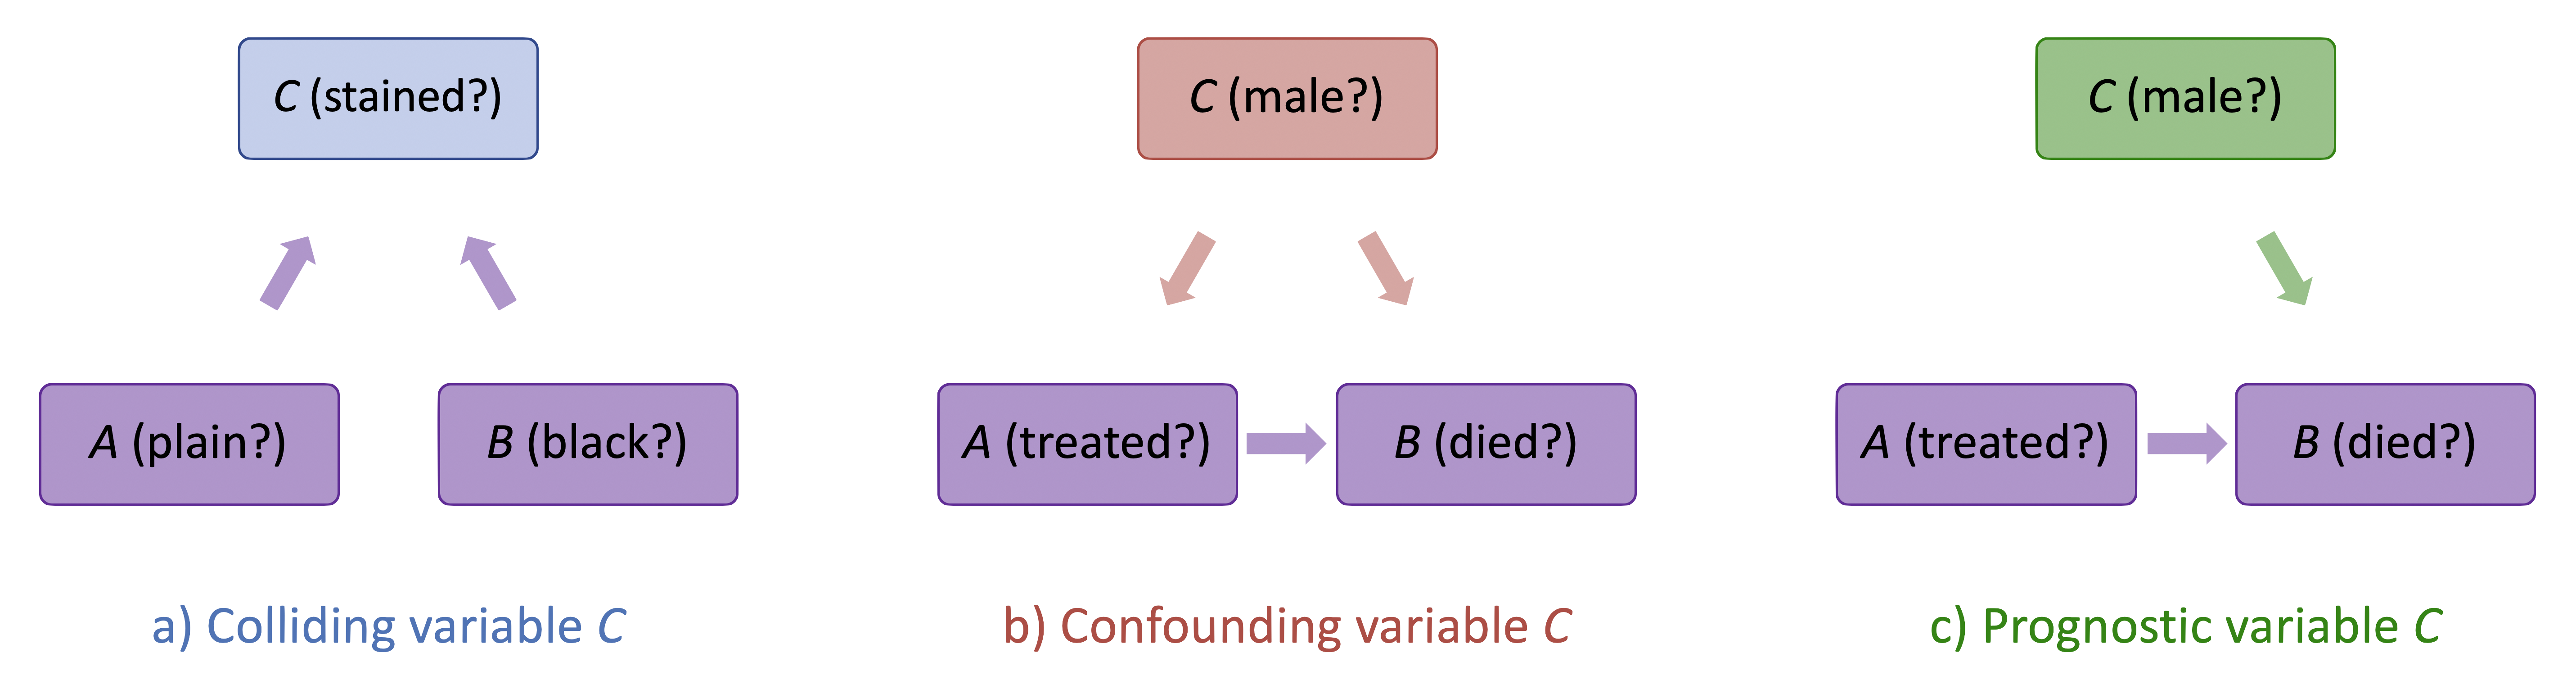 Figure 1.4: Causal diagrams for A, B and C when C is a colliding, confounding and prognostic variable.